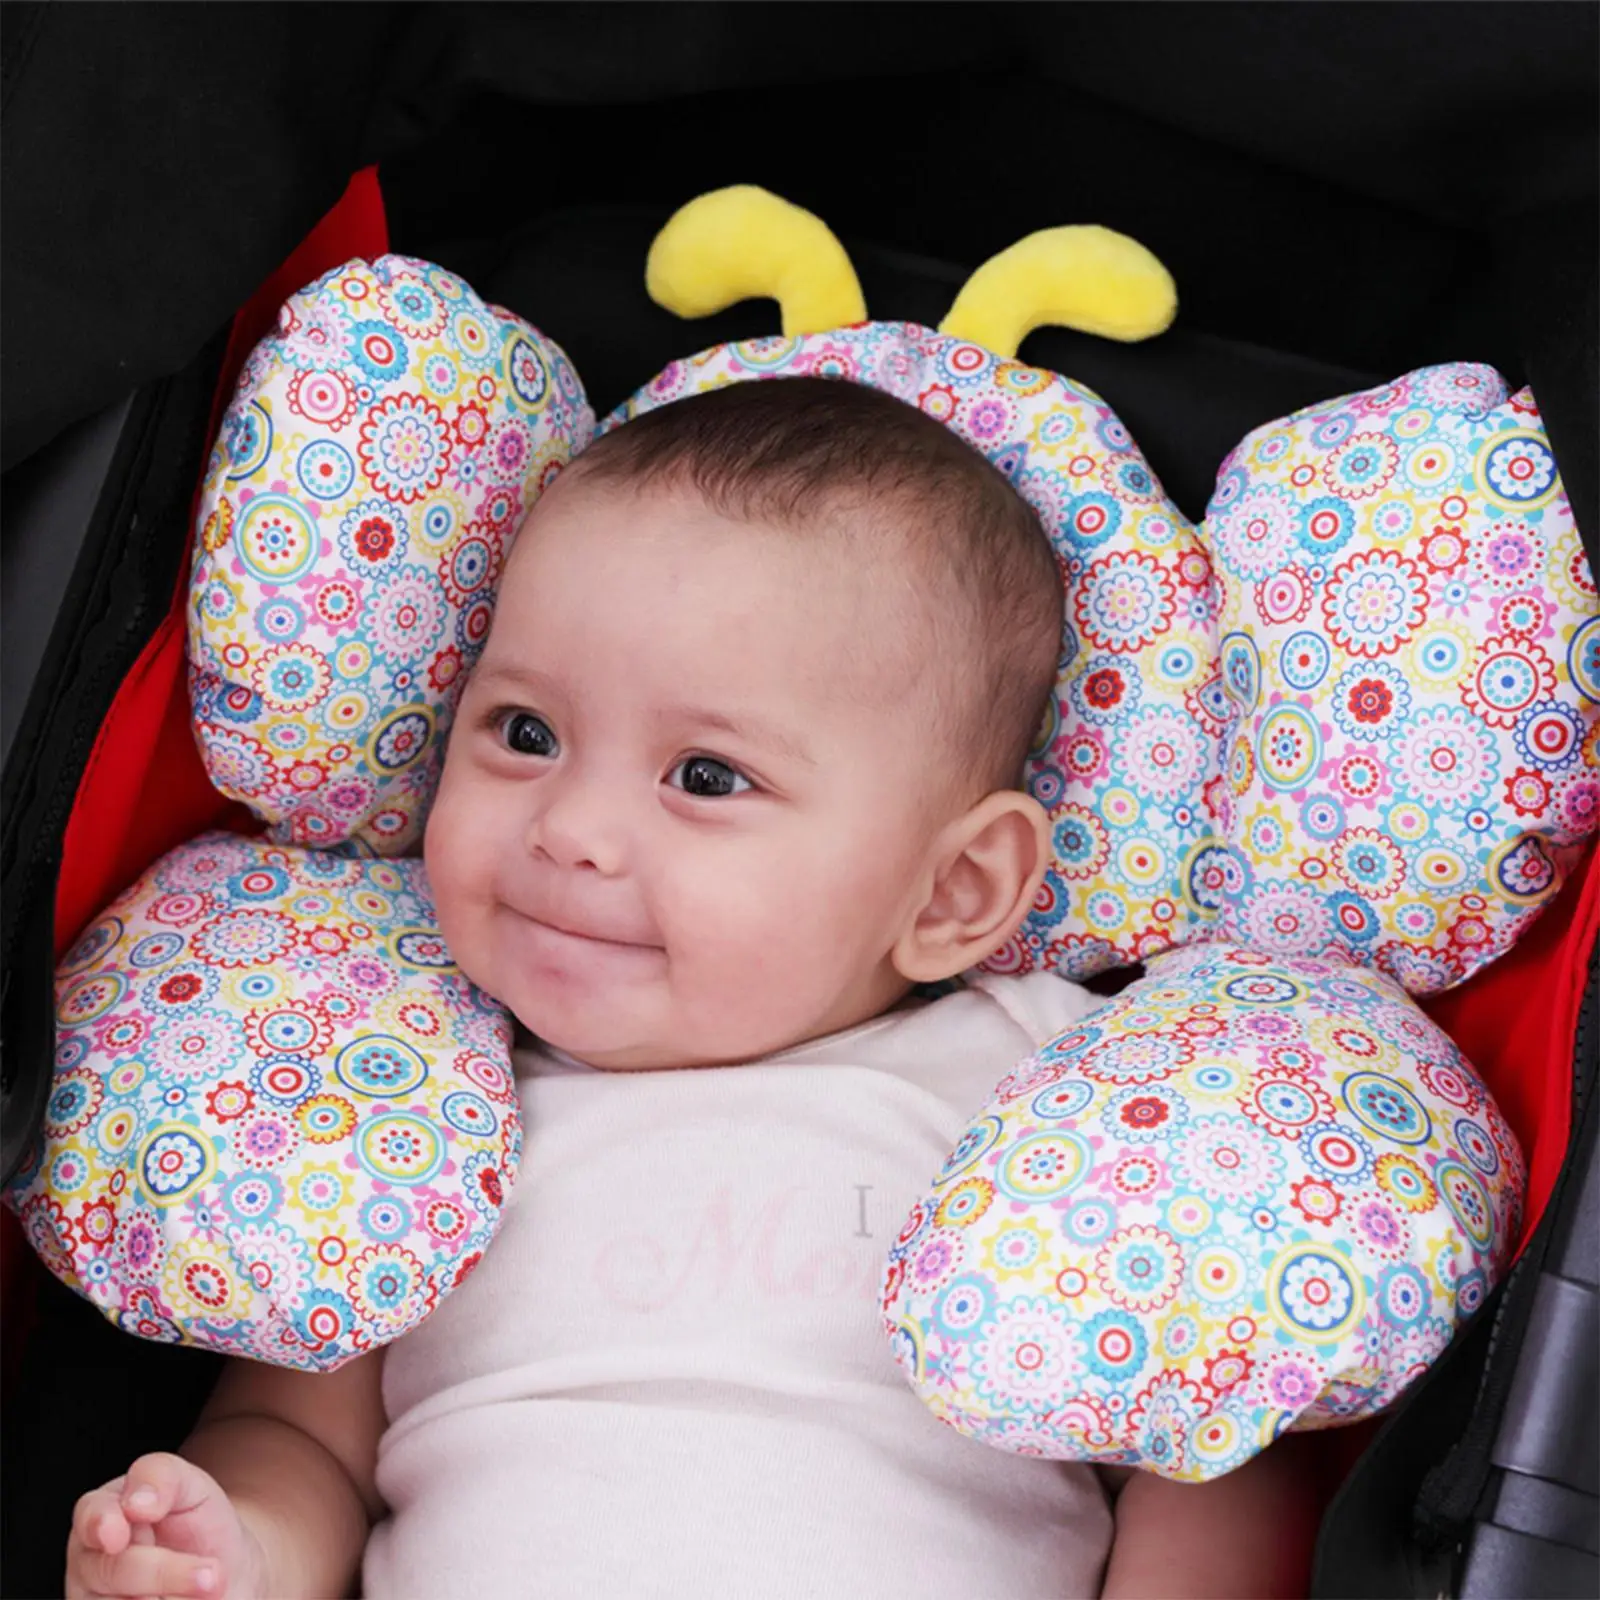 Soft Baby Car Seat  Stroller Comfortable Headrest Cushion Infant Travel for 0-1 Years Old Baby Sleeping Baby Toddlers Boys